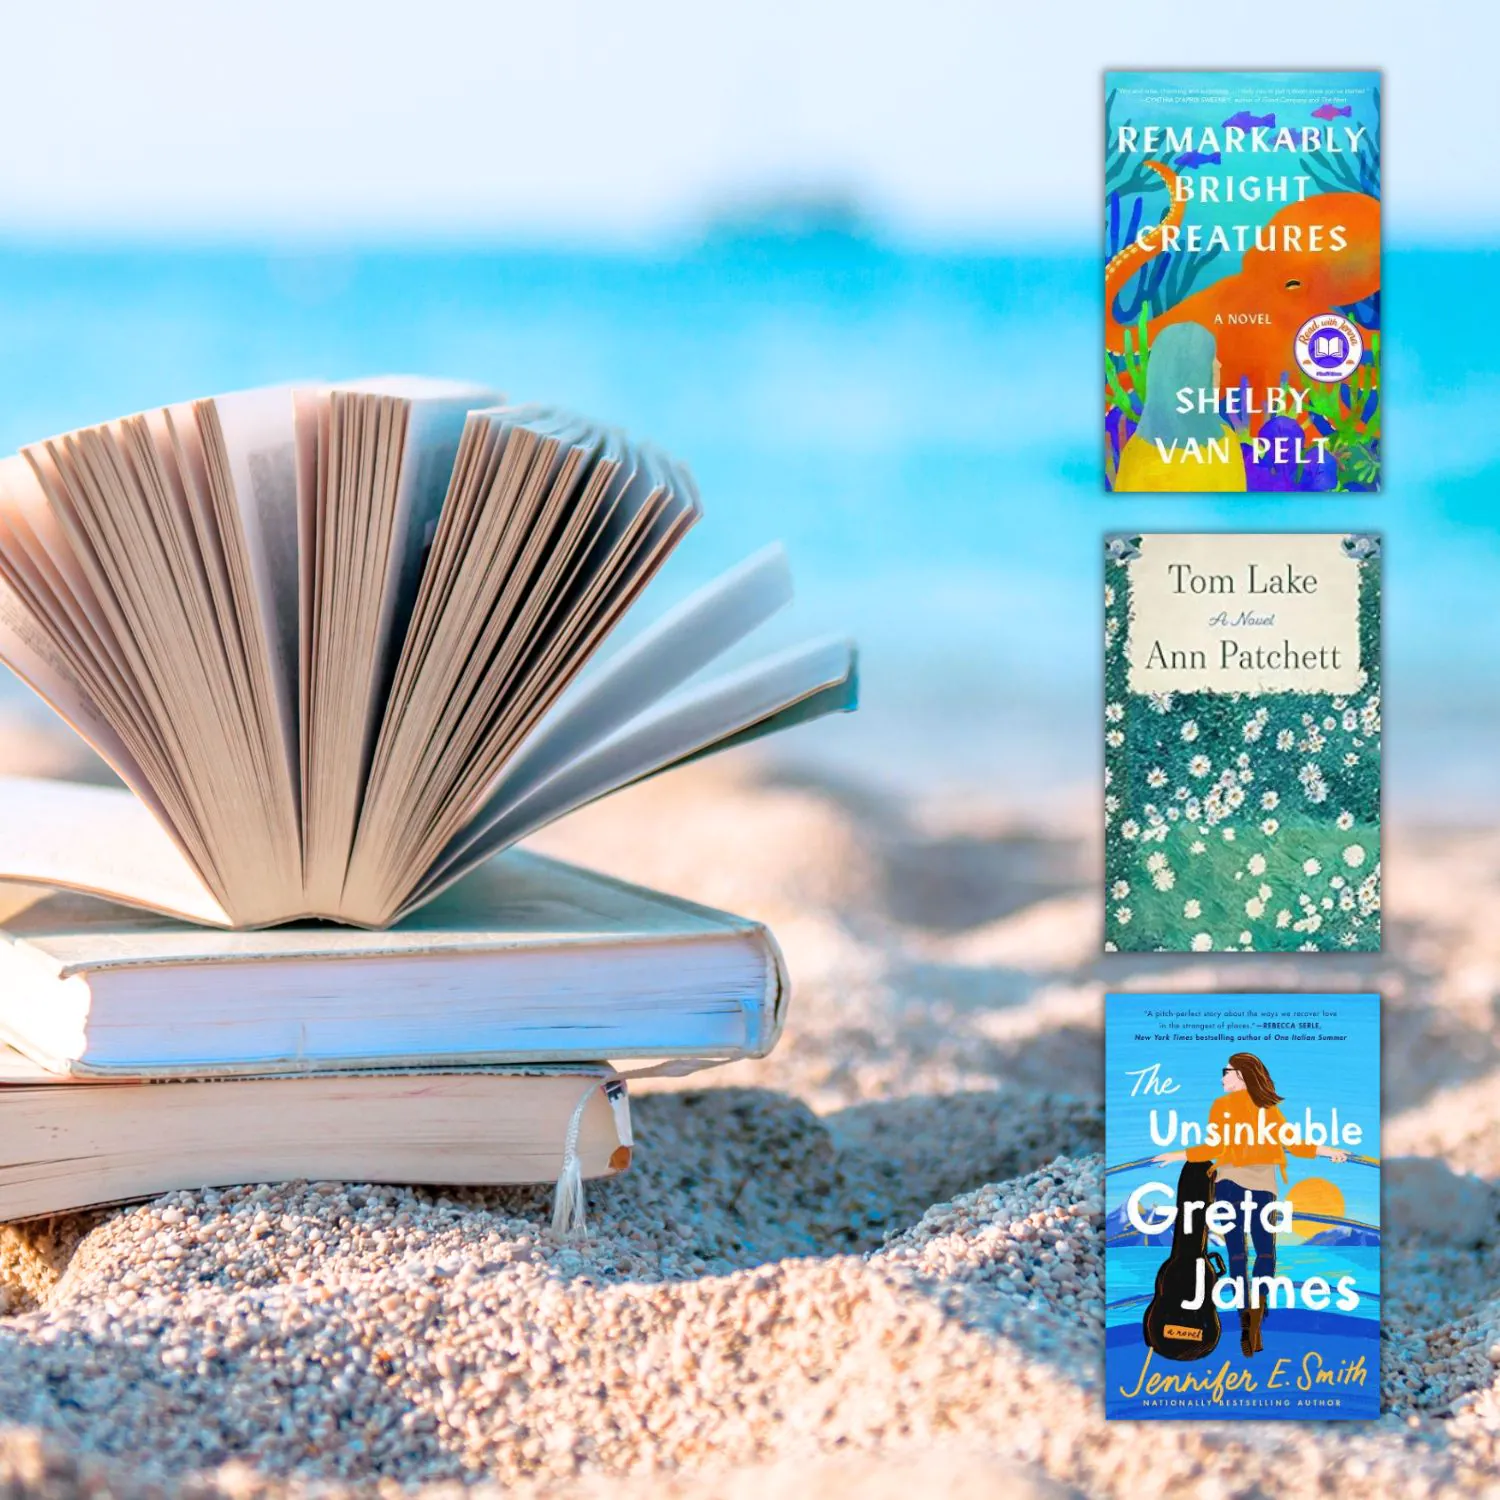 stack of books on beach with book covers from this list